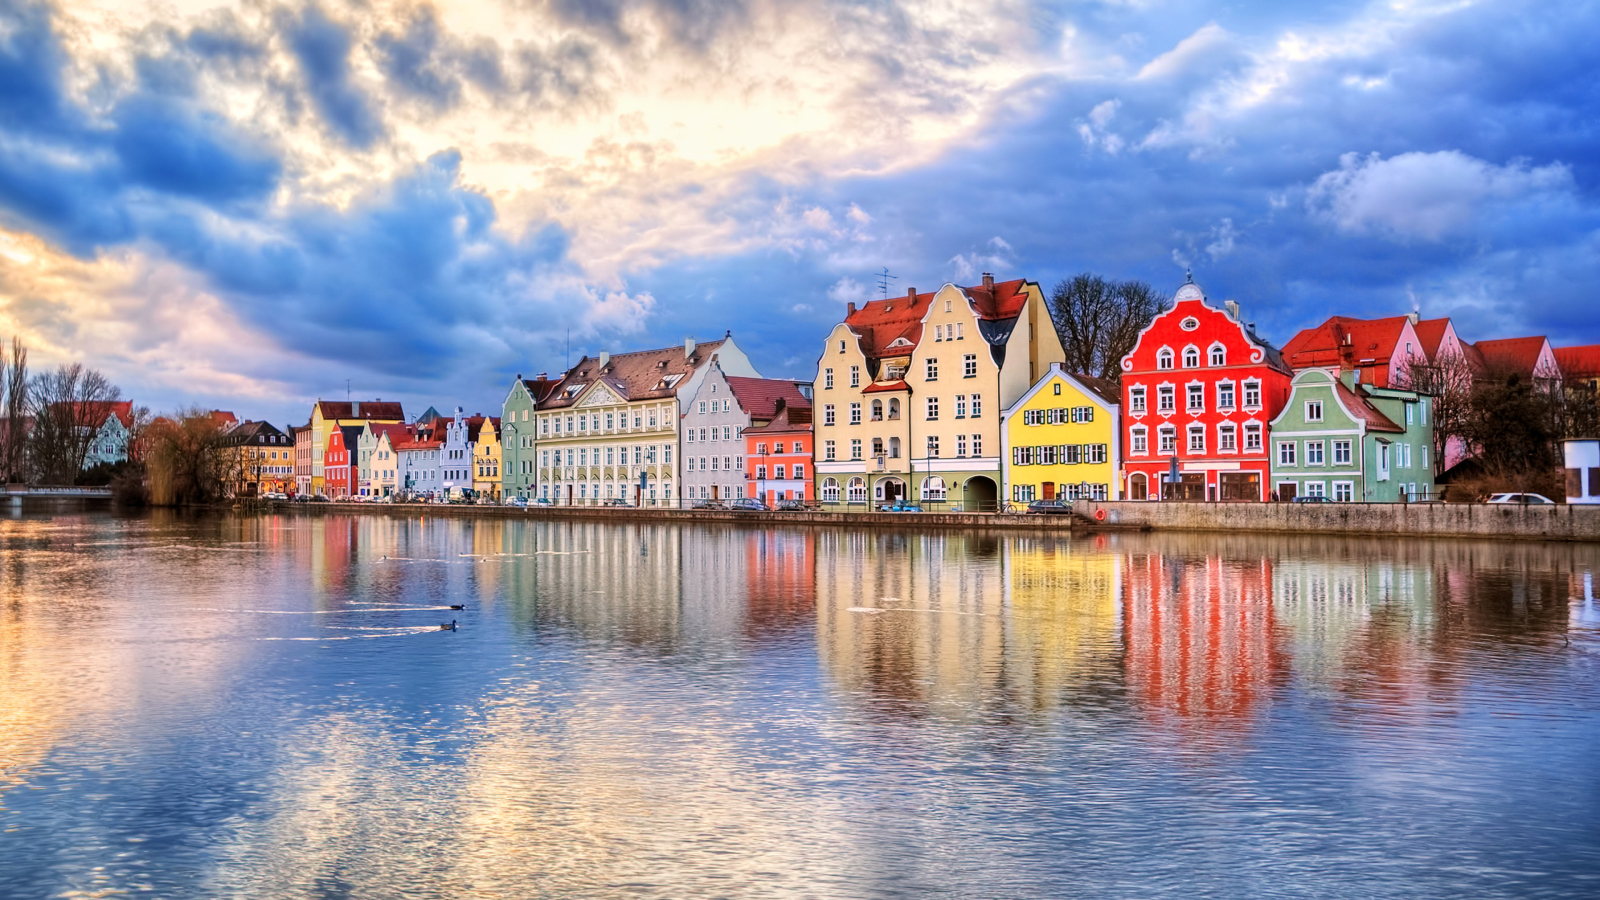 Multicolored houses on the waterfront, Germany